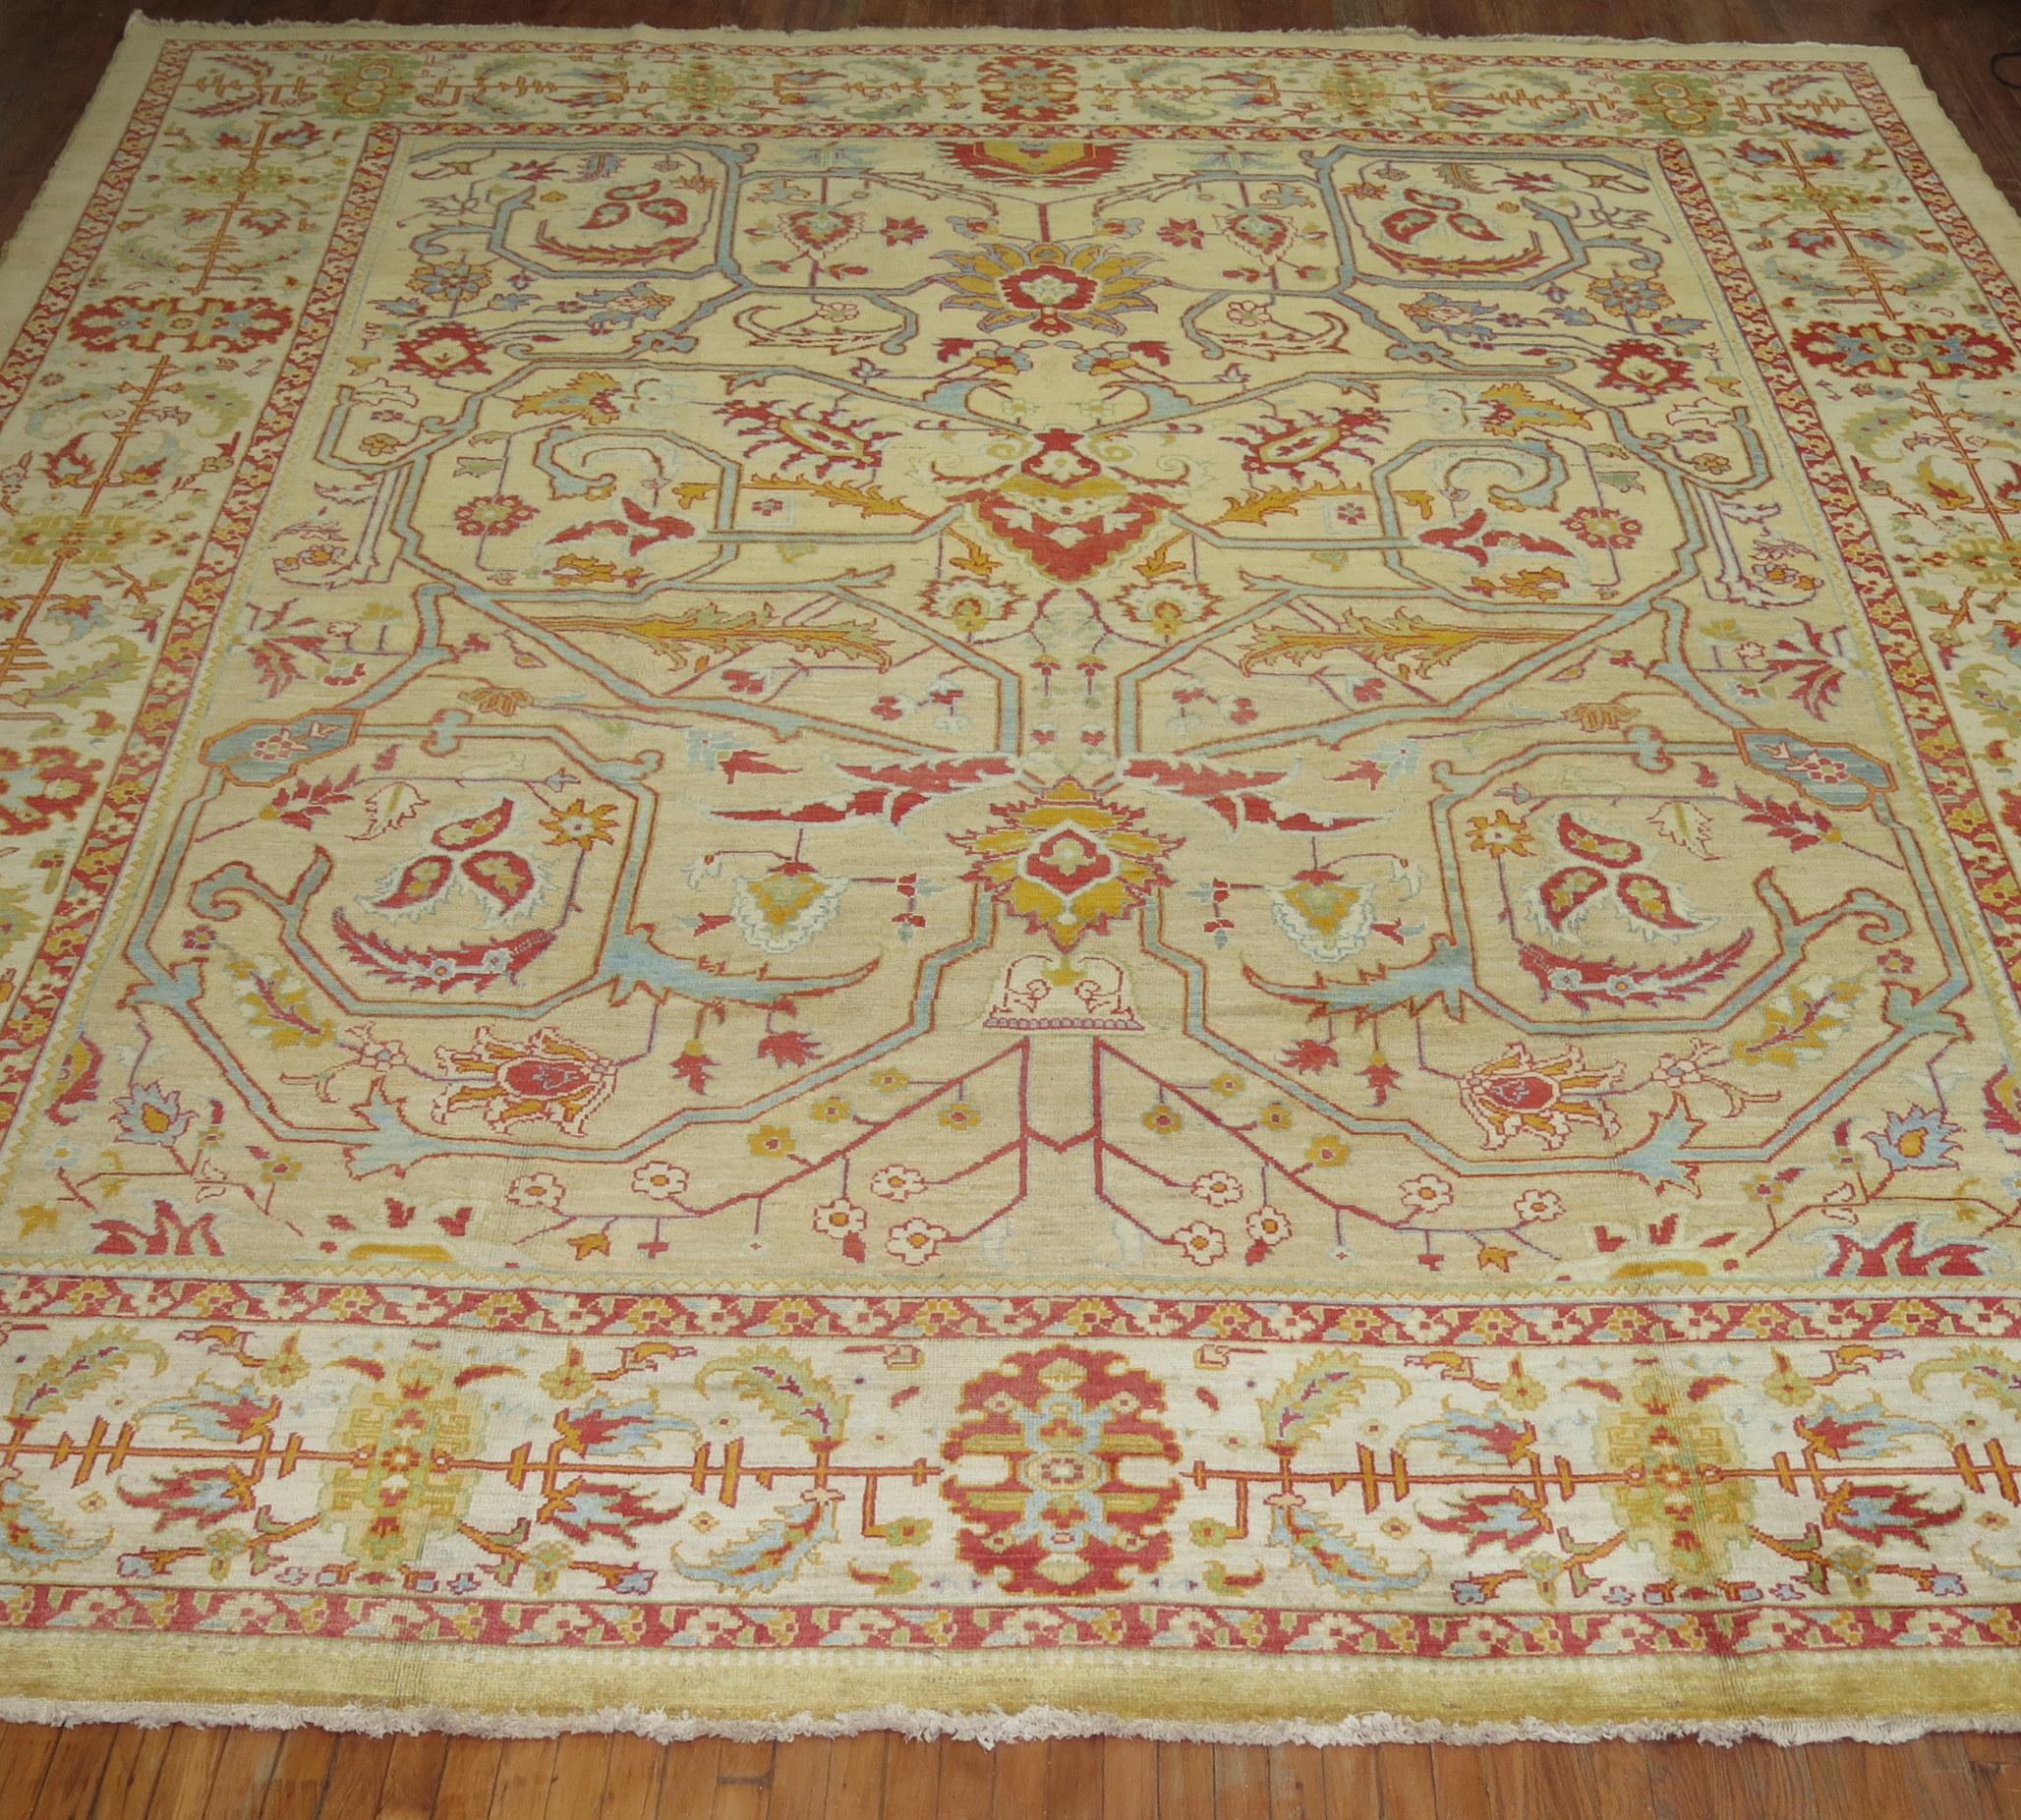 Hand-Knotted Vintage Persian Oversize Carpet